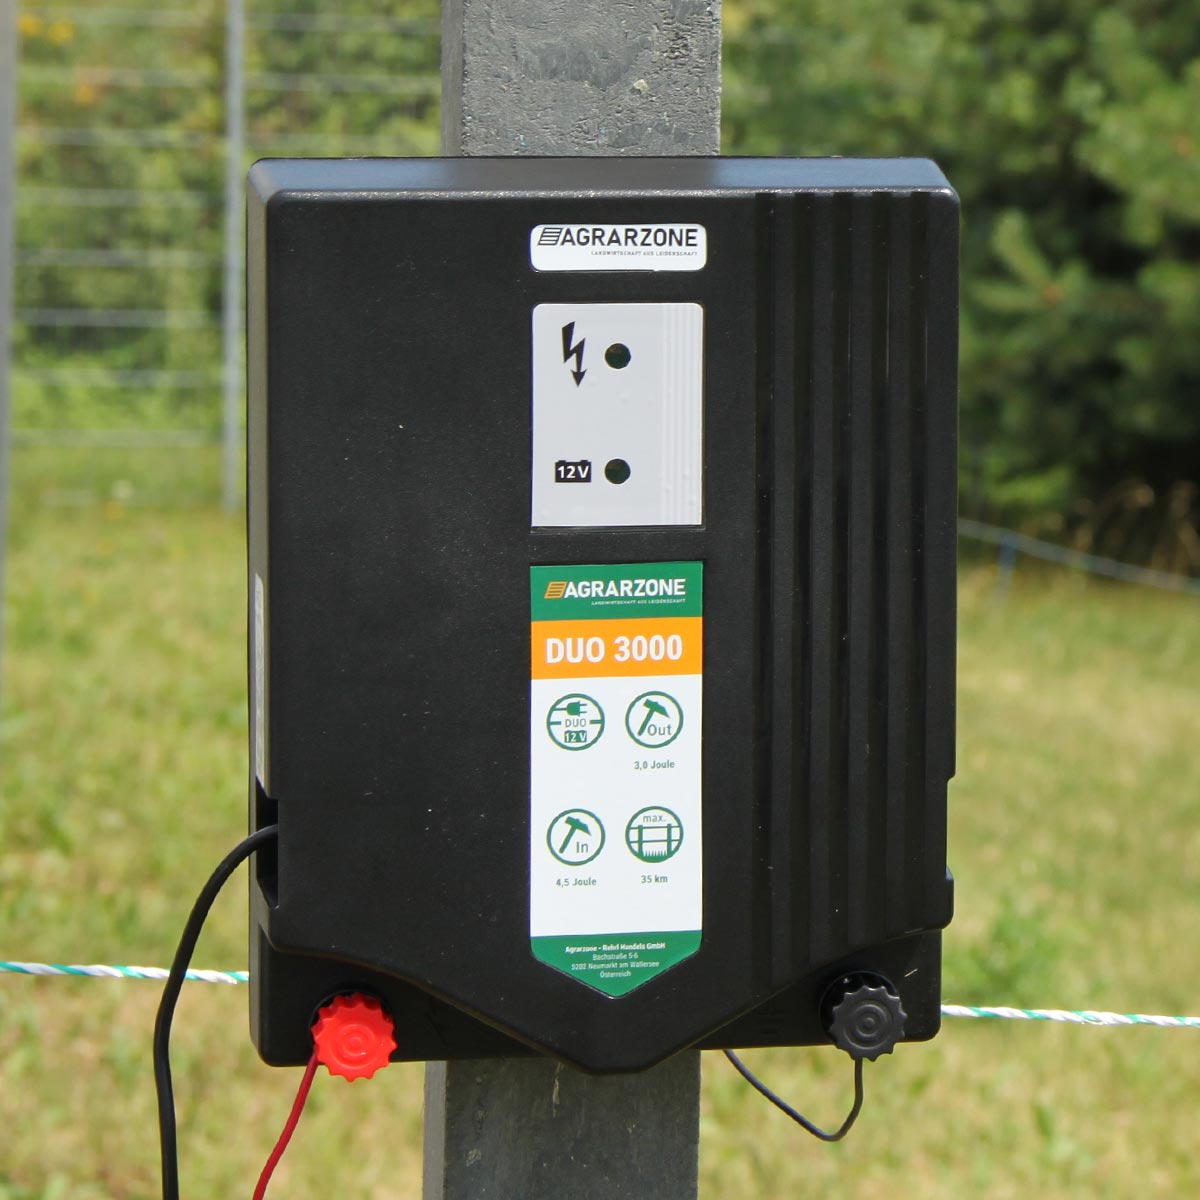 Agrarzone DUO 3000 electric fence energiser 230V / 12V, 4,5 joules